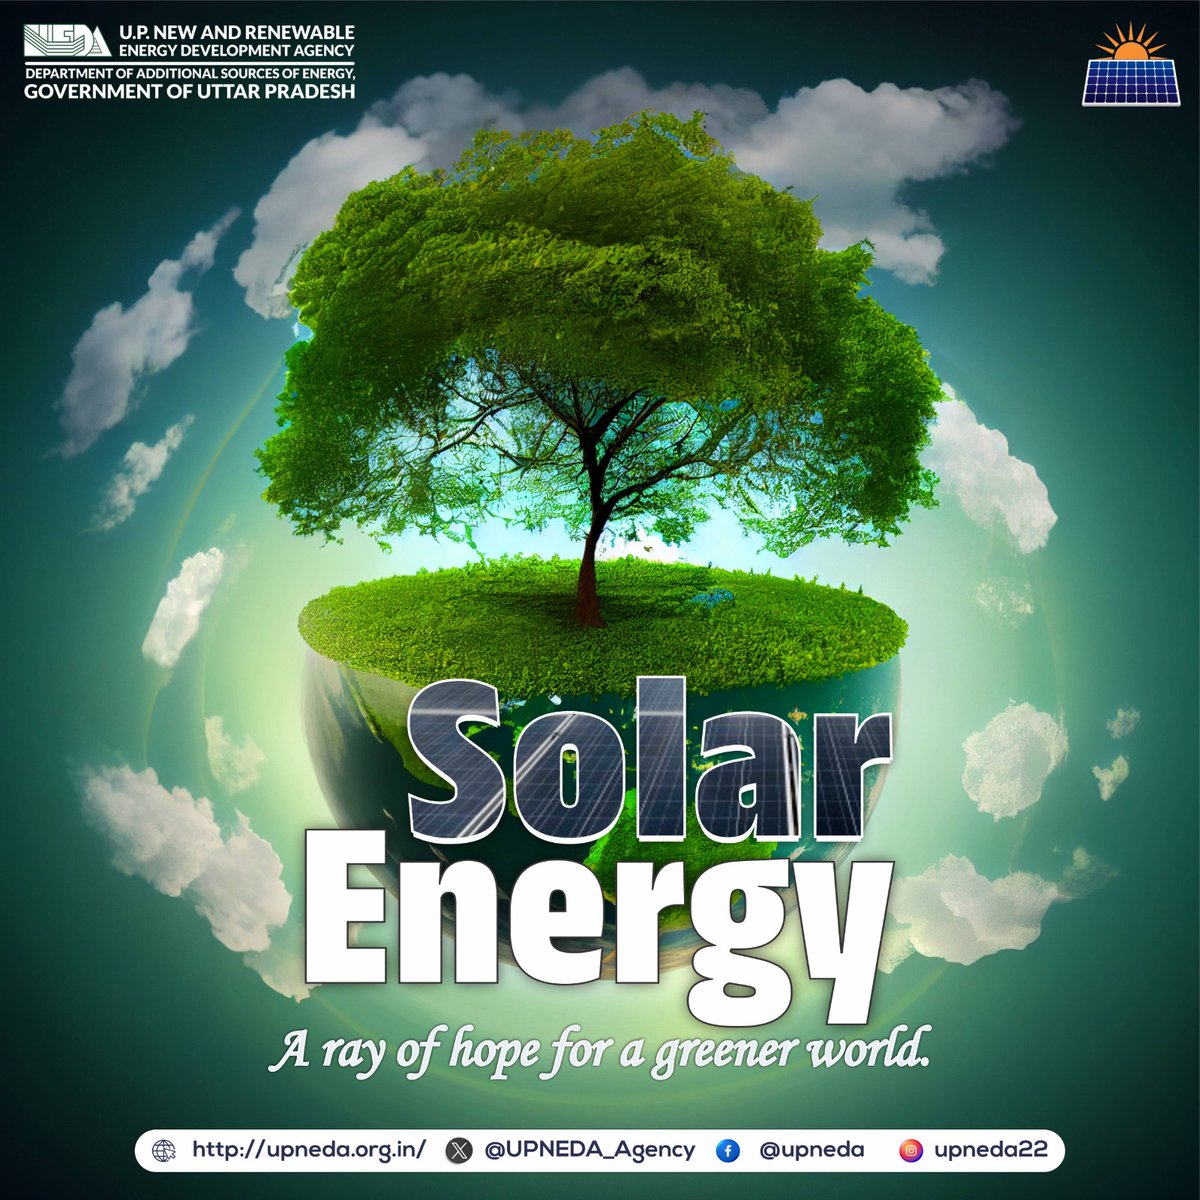 Solar energy: a ray of hope for a greener world! Let's embrace the power of the sun to create a brighter, more sustainable future.
 
#SolarEnergy #CleanEnergy #RenewableEnergy 
#SolarPower #UPNEDA #upneda_agency
@CMOfficeUP
@aksharmaBharat
@isomendratomar
@ChiefSecyUP…